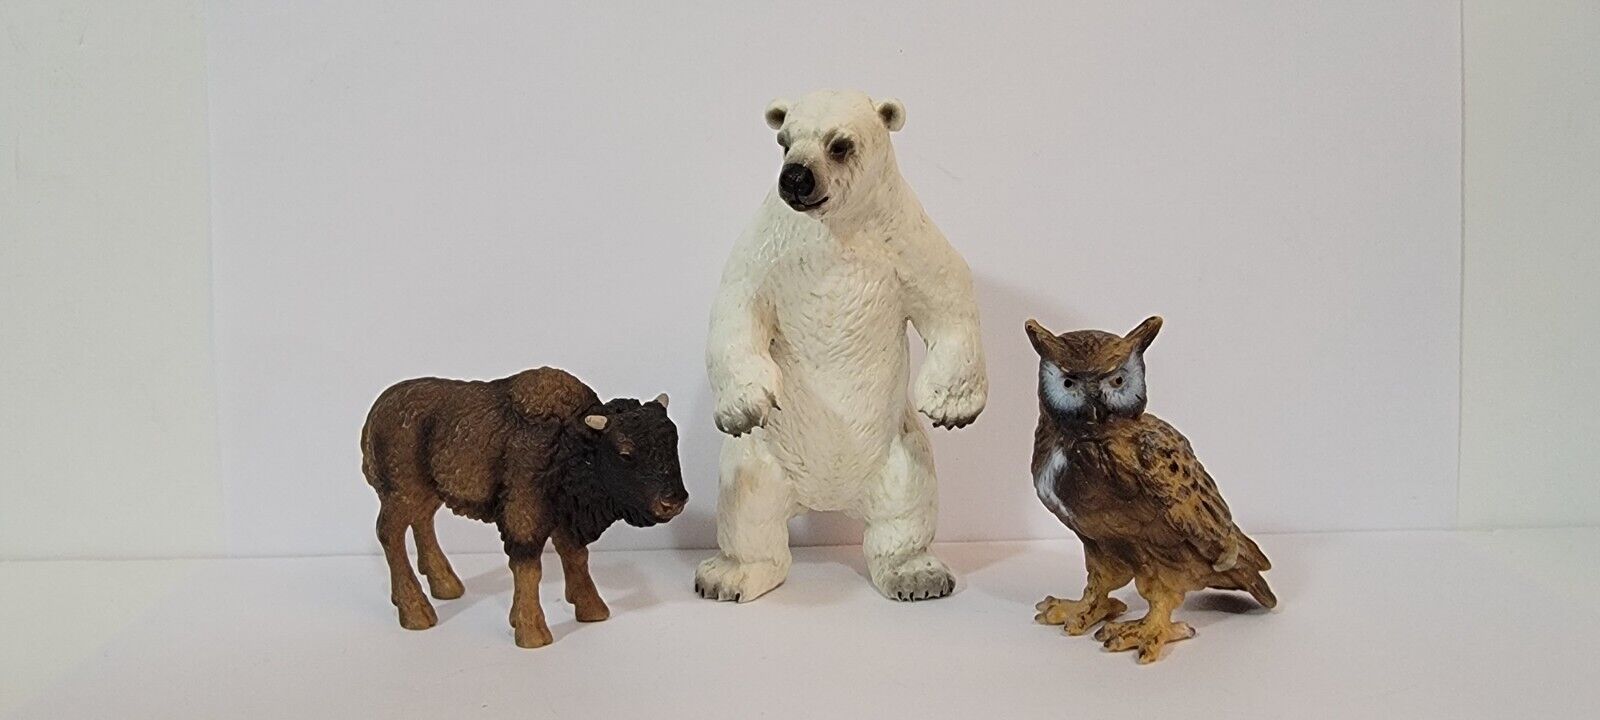 SCHLEICH Lot of 3 North American Forest Animal Figure BISON POLAR BEAR OWL